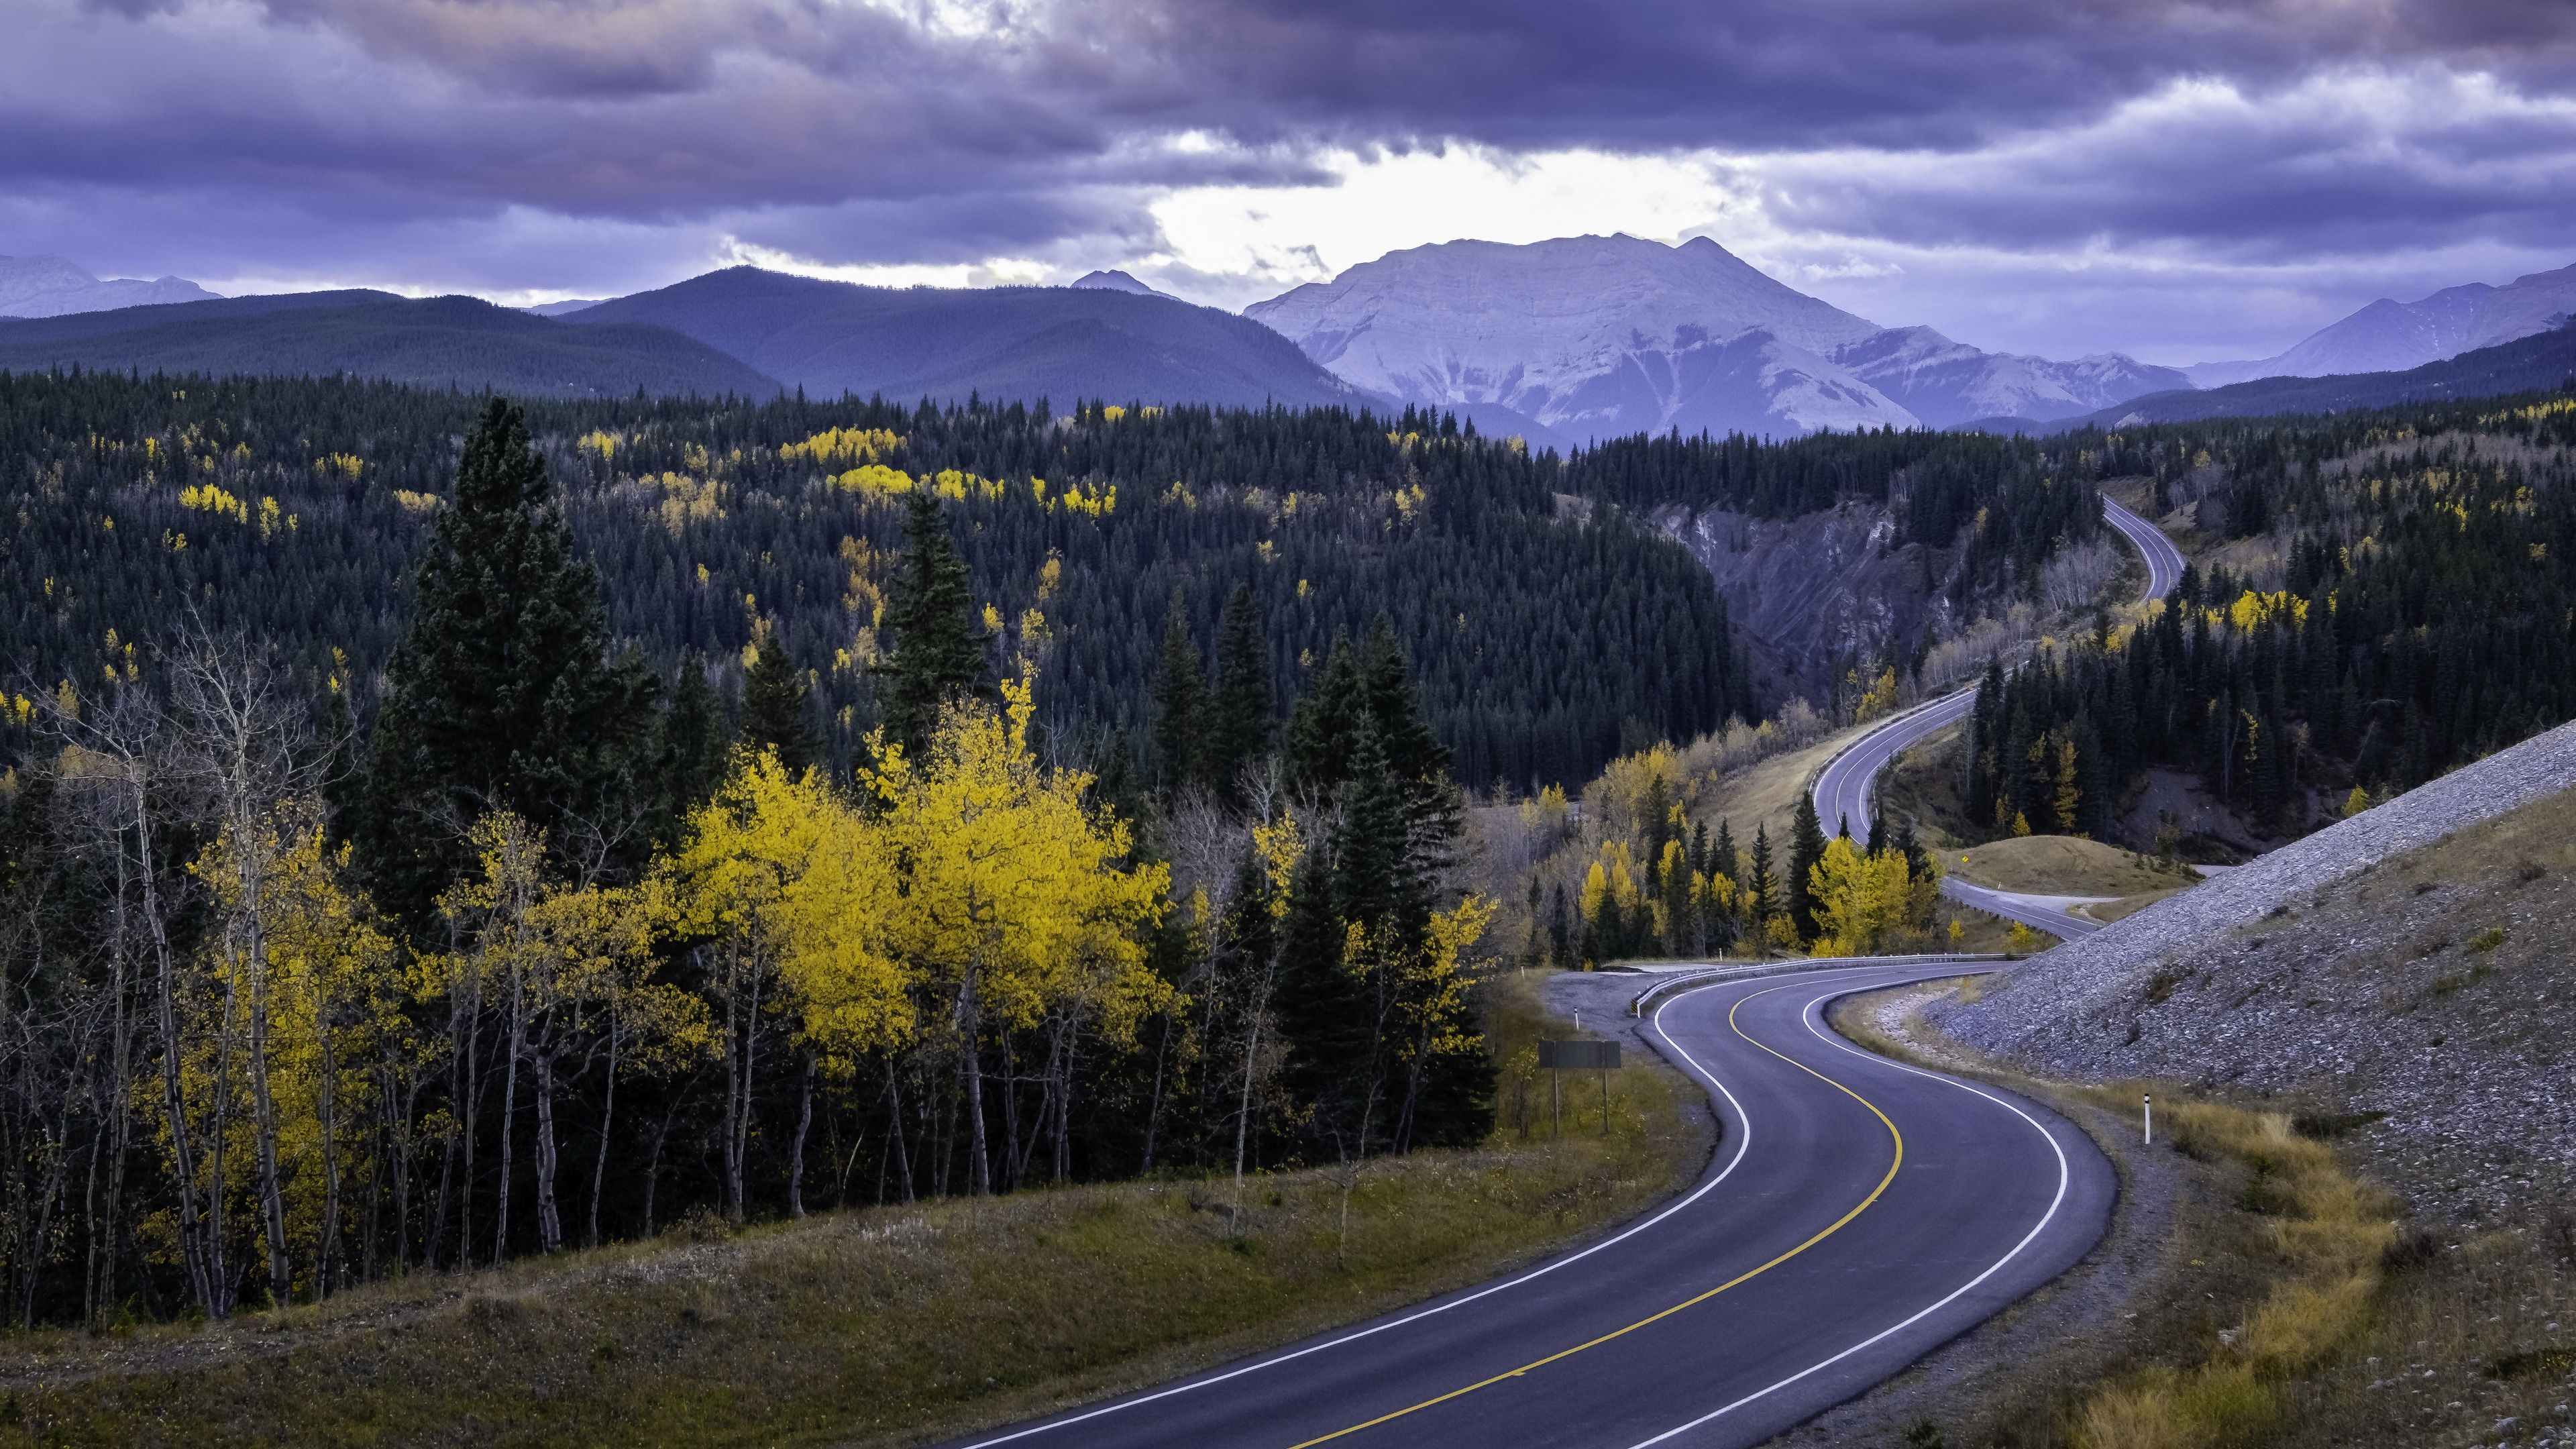 Curved Roadways Between Mountain Under Cloudy Sky 4K HD Nature Wallpaper